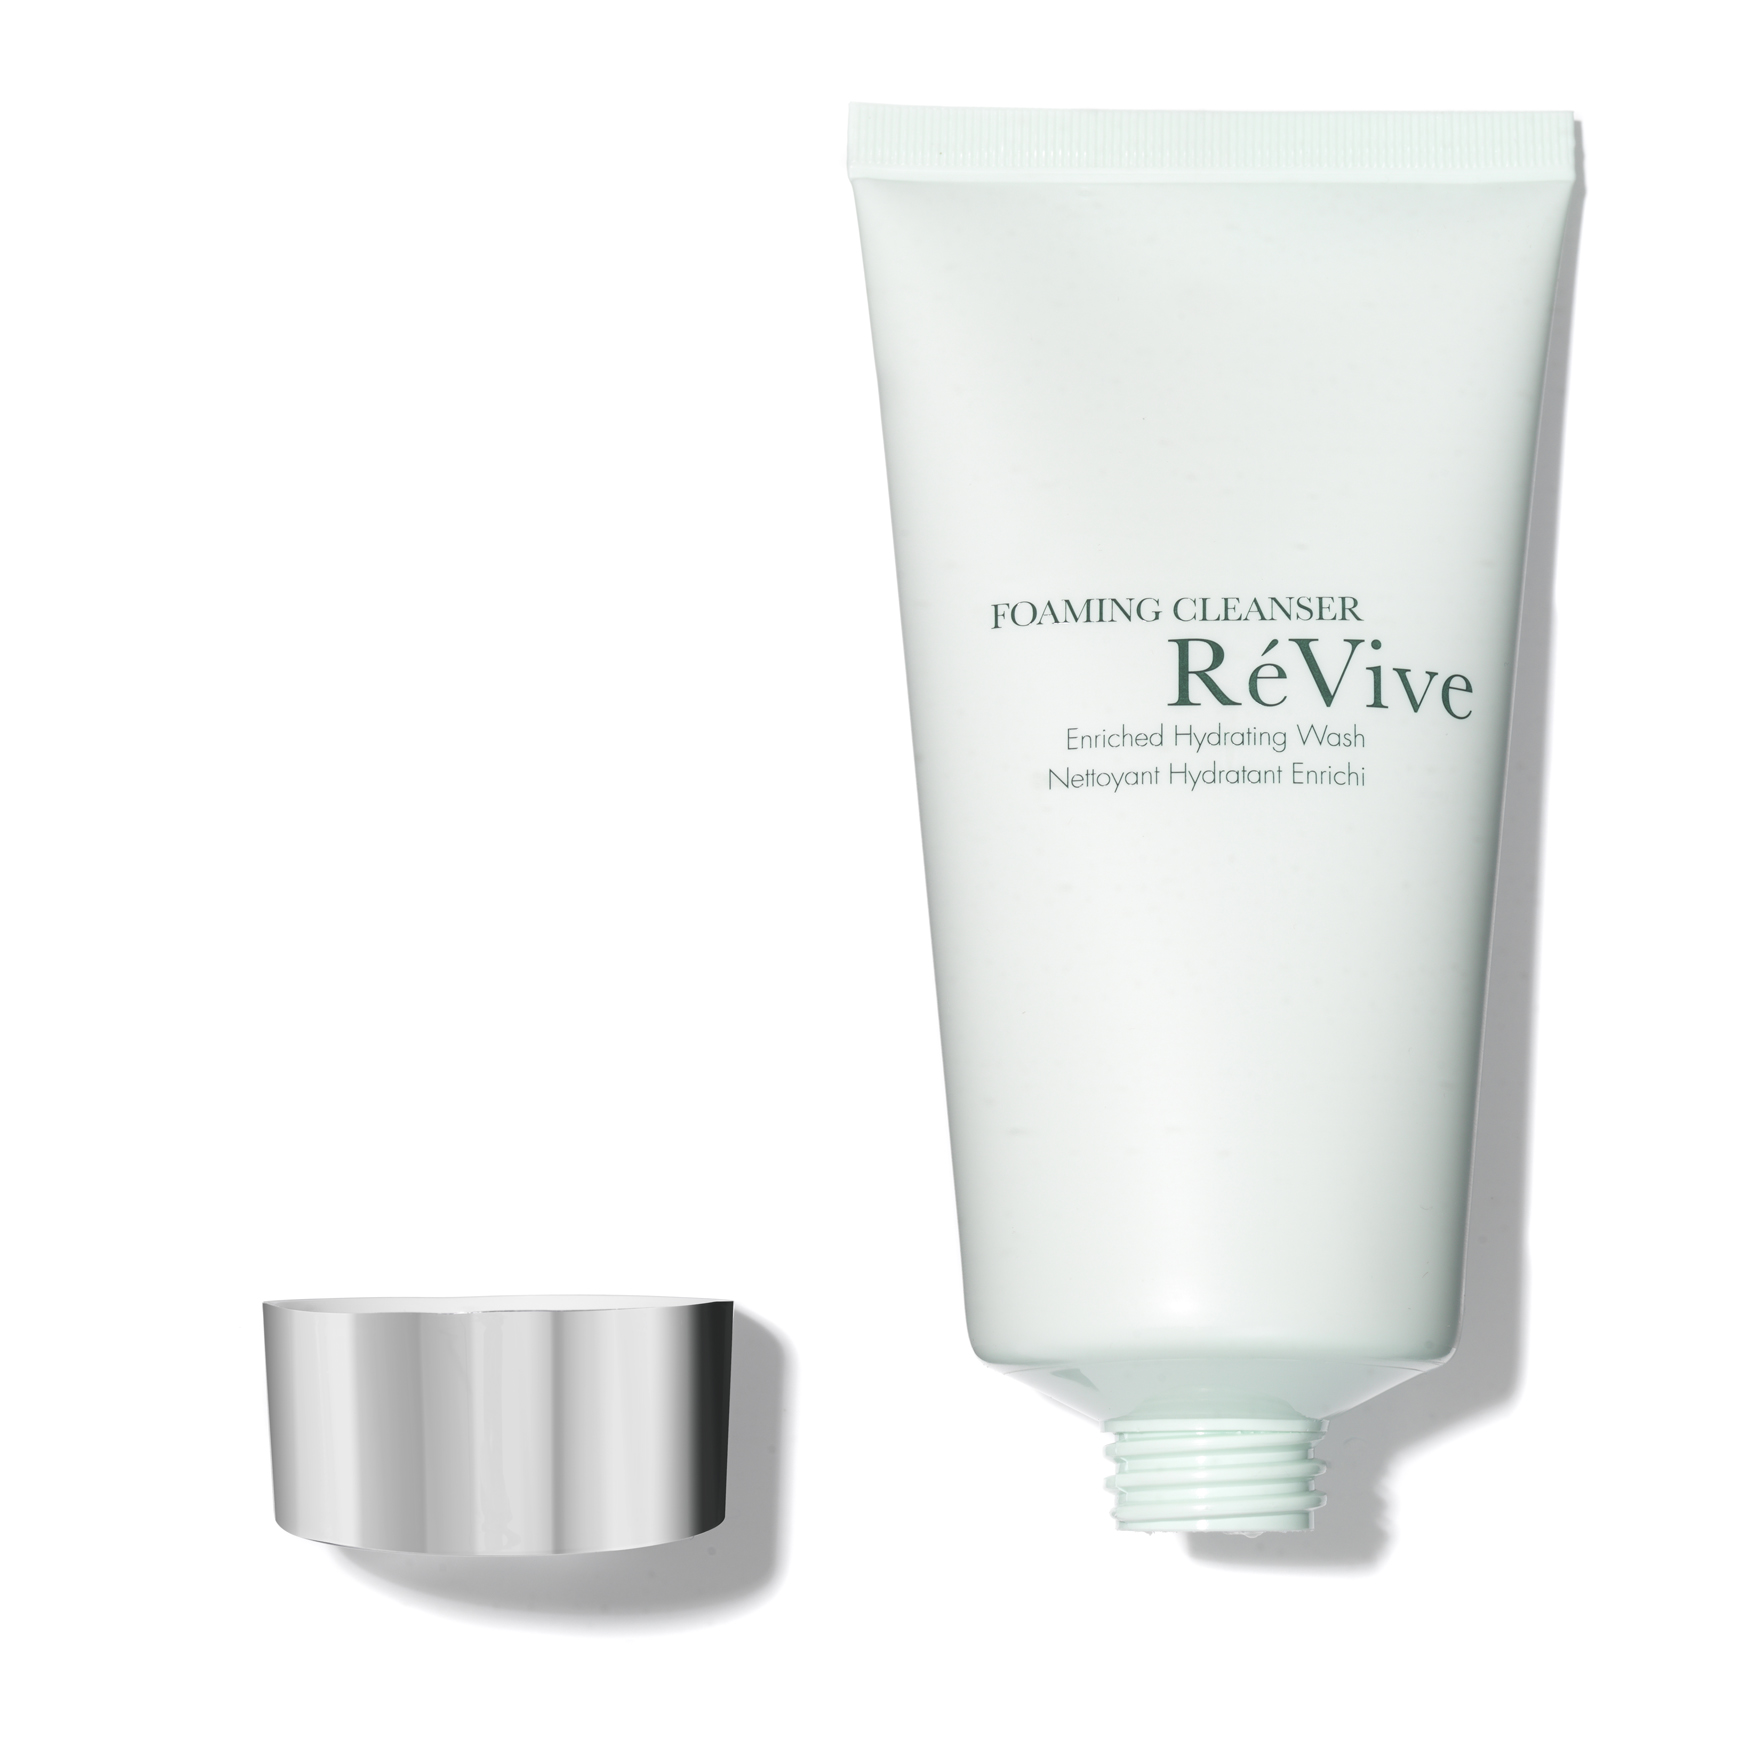 Révive Foaming Cleanser Enriched Hydrating Wash | Space NK